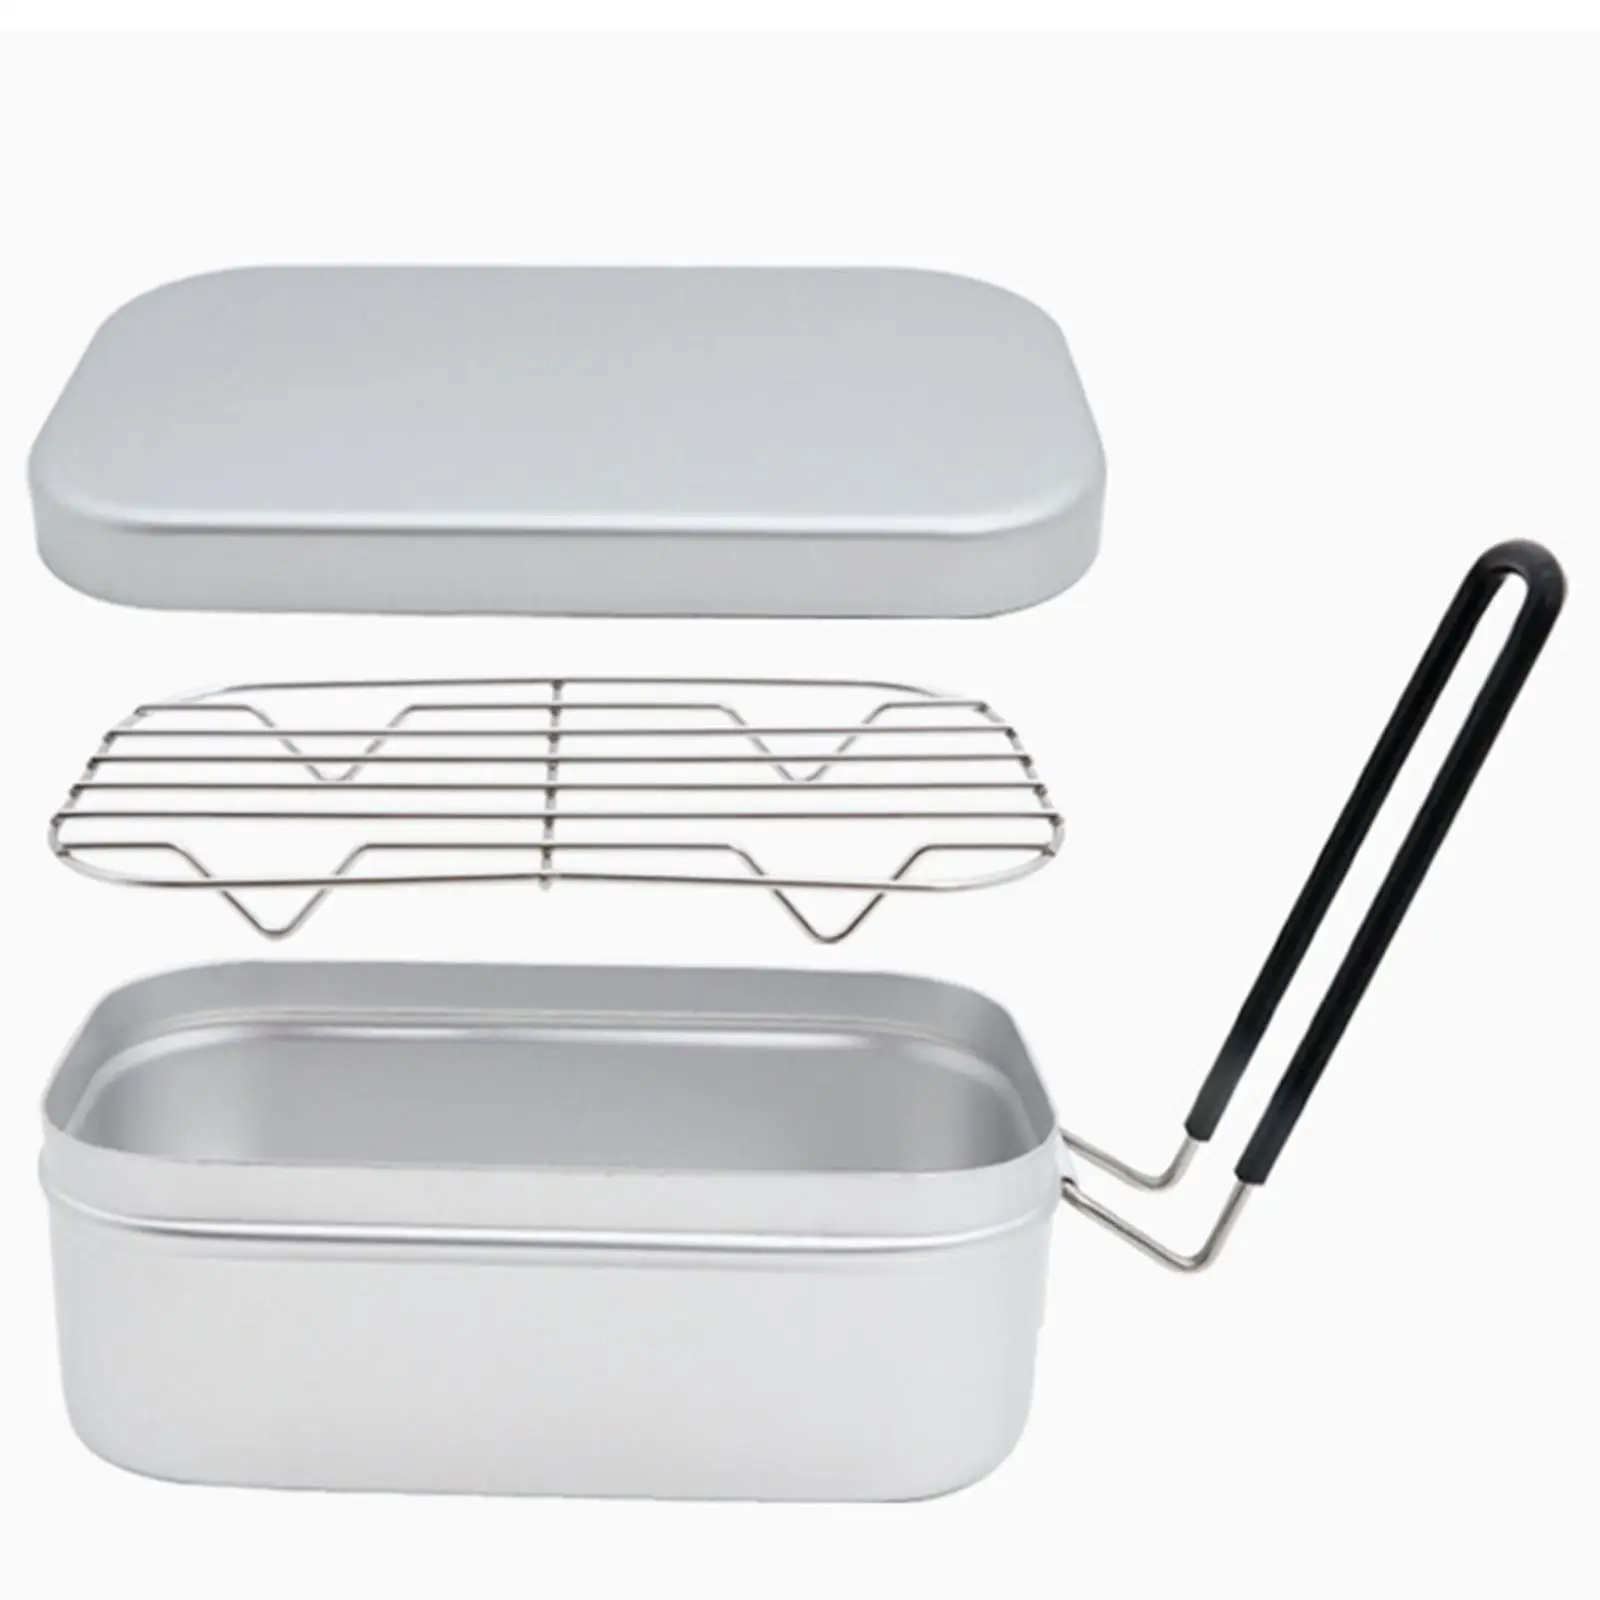 Stainless Steel  Steaming Stand Cooking Rack Food Container Storage Stand for Picnic Cooking Mountaineering Hiking Supplies